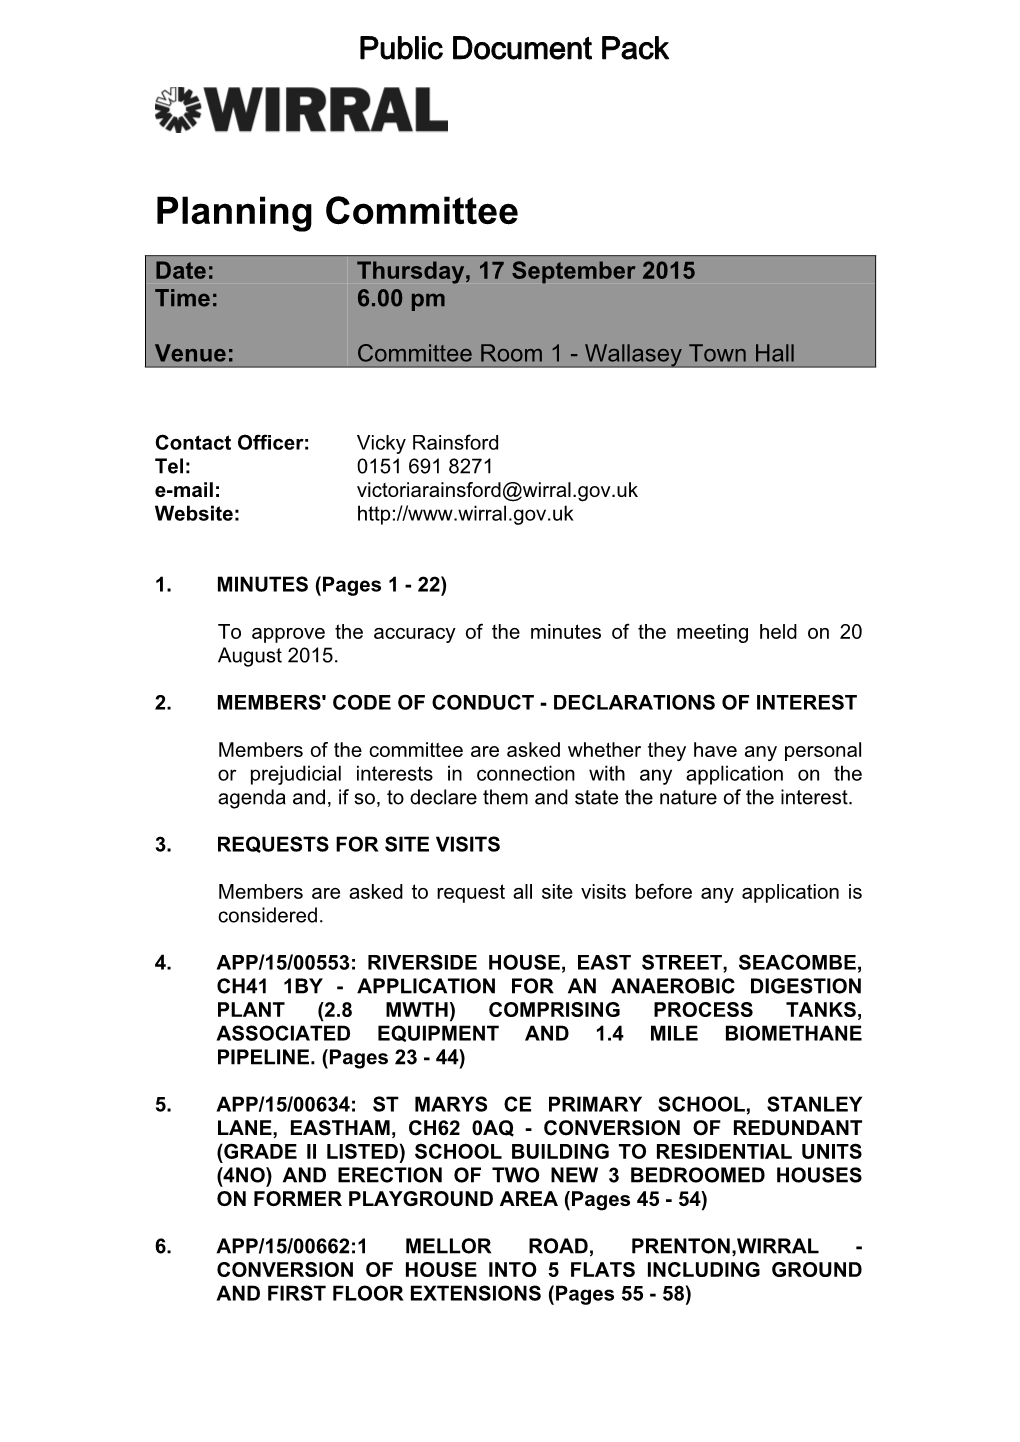 (Public Pack)Agenda Document for Planning Committee, 17/09/2015